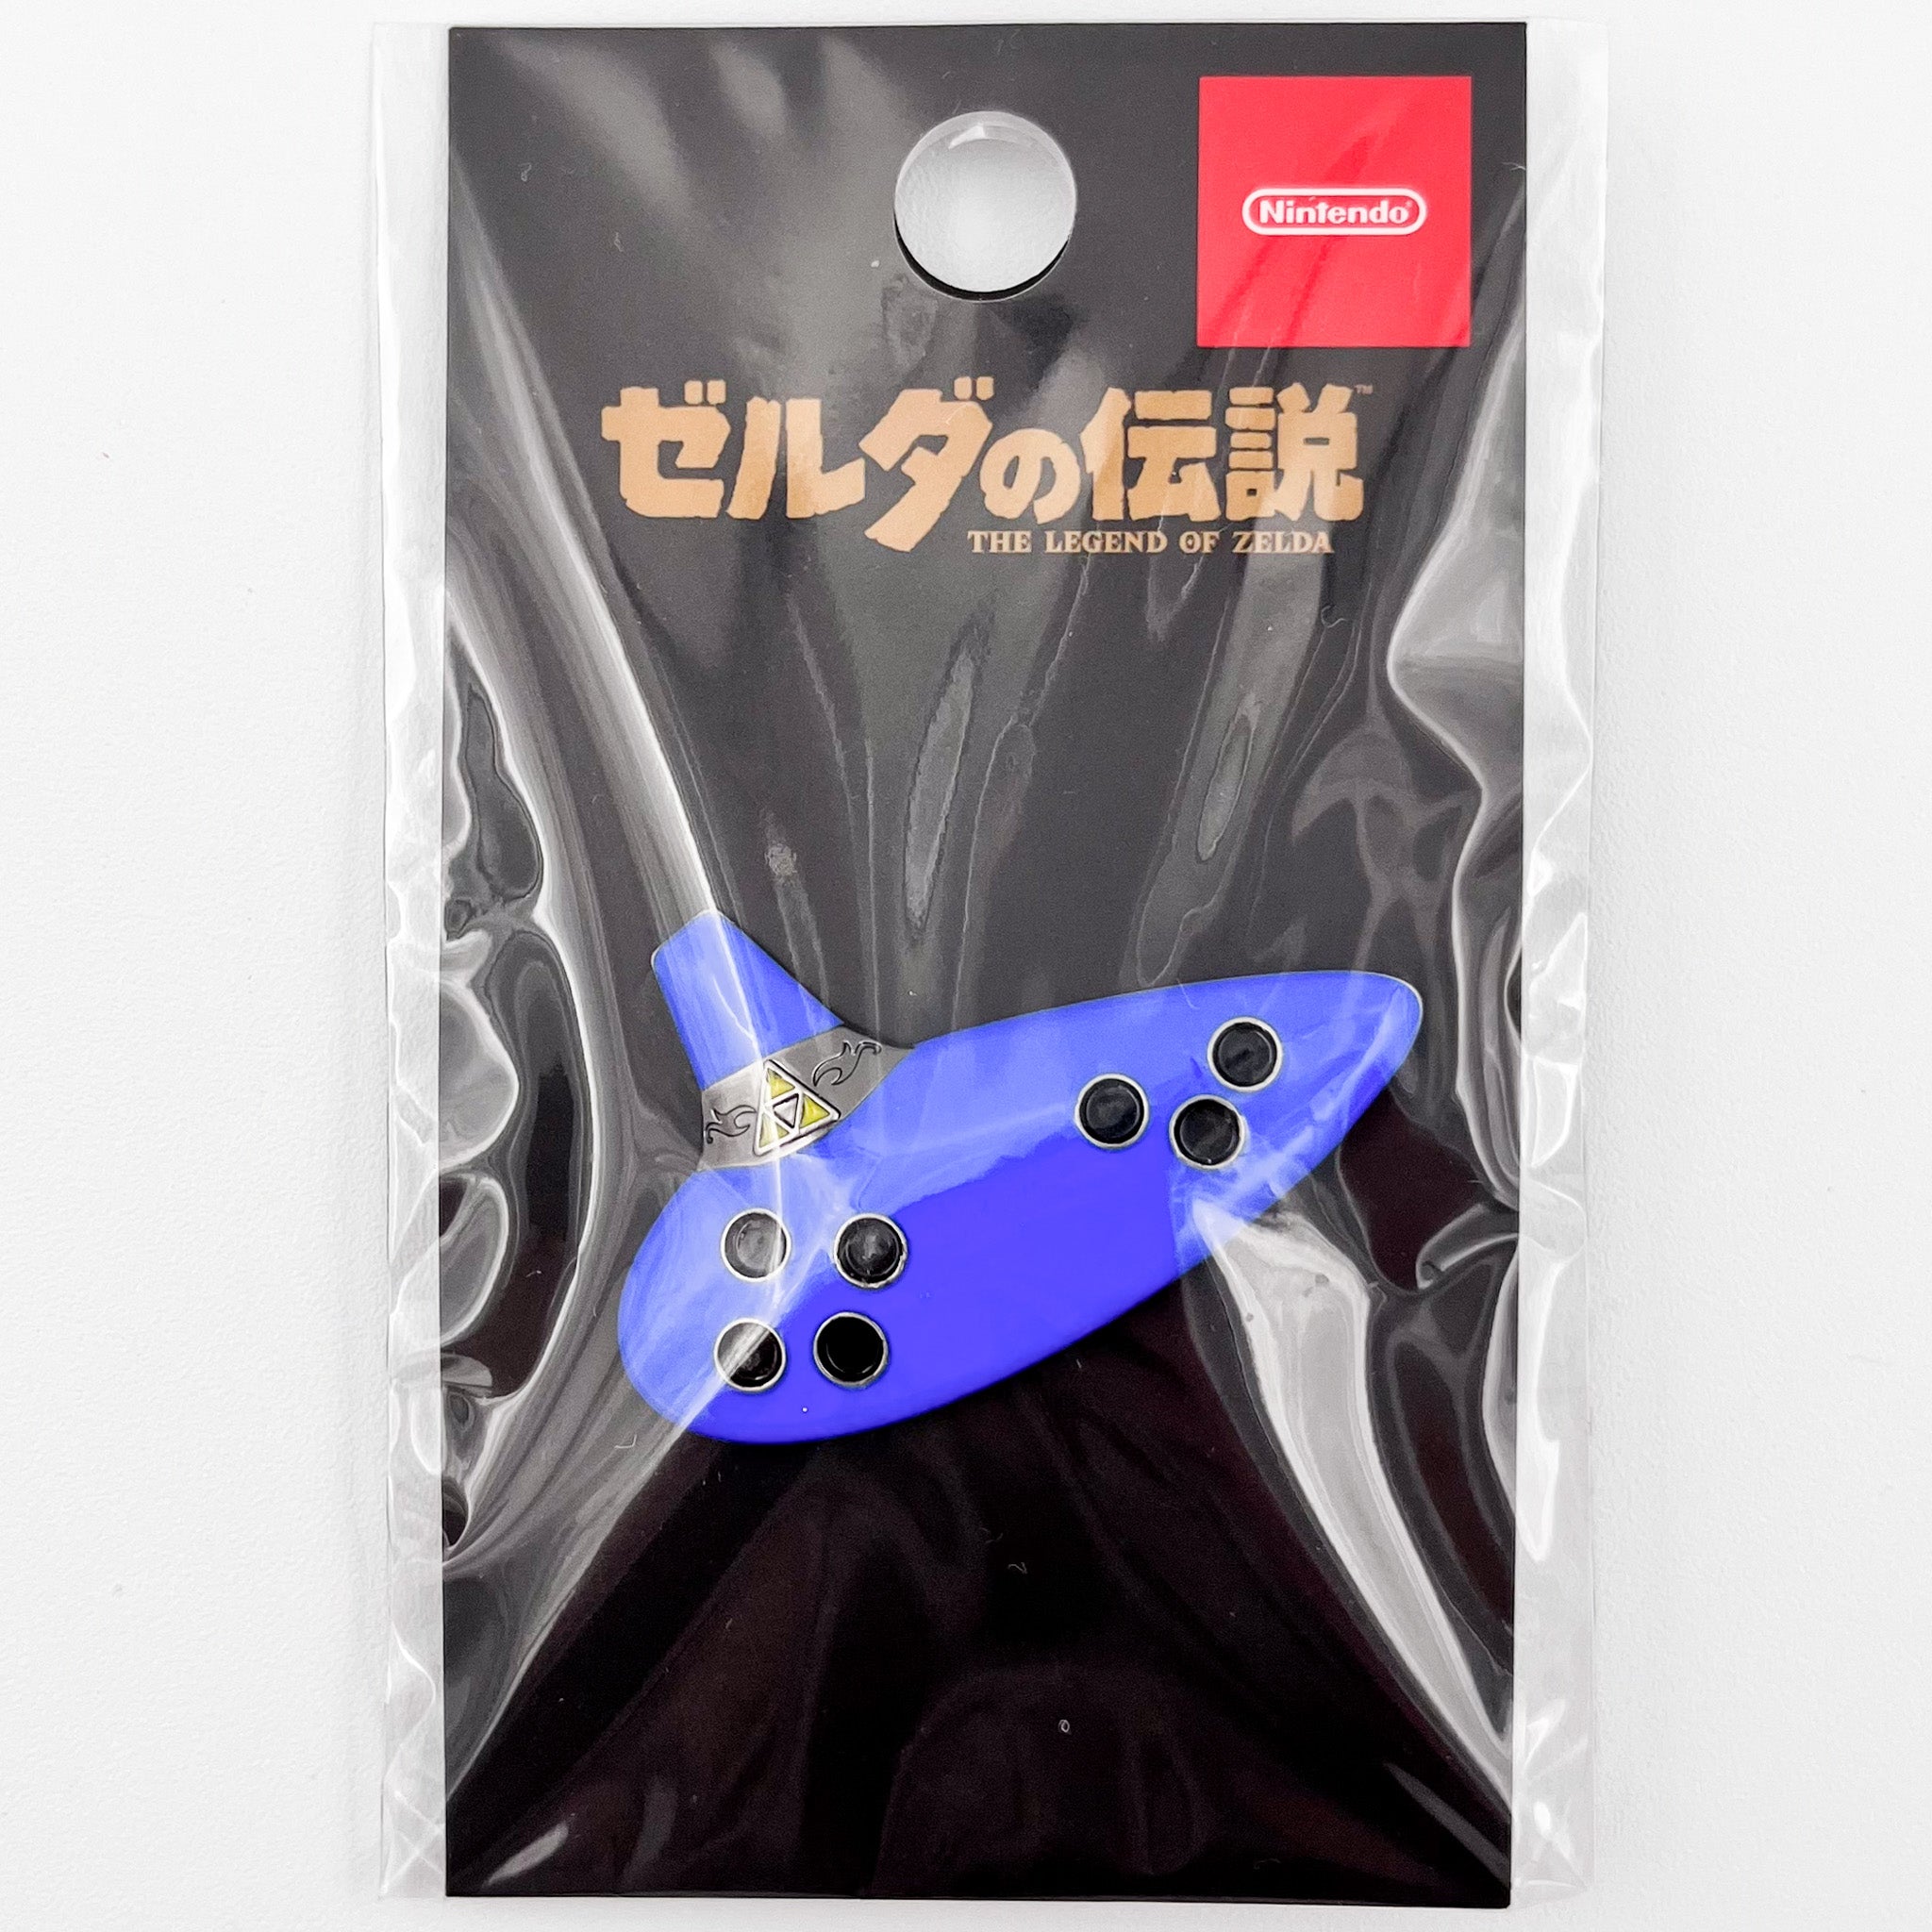 Ocarina Pin from Nintendo Stores in Japan